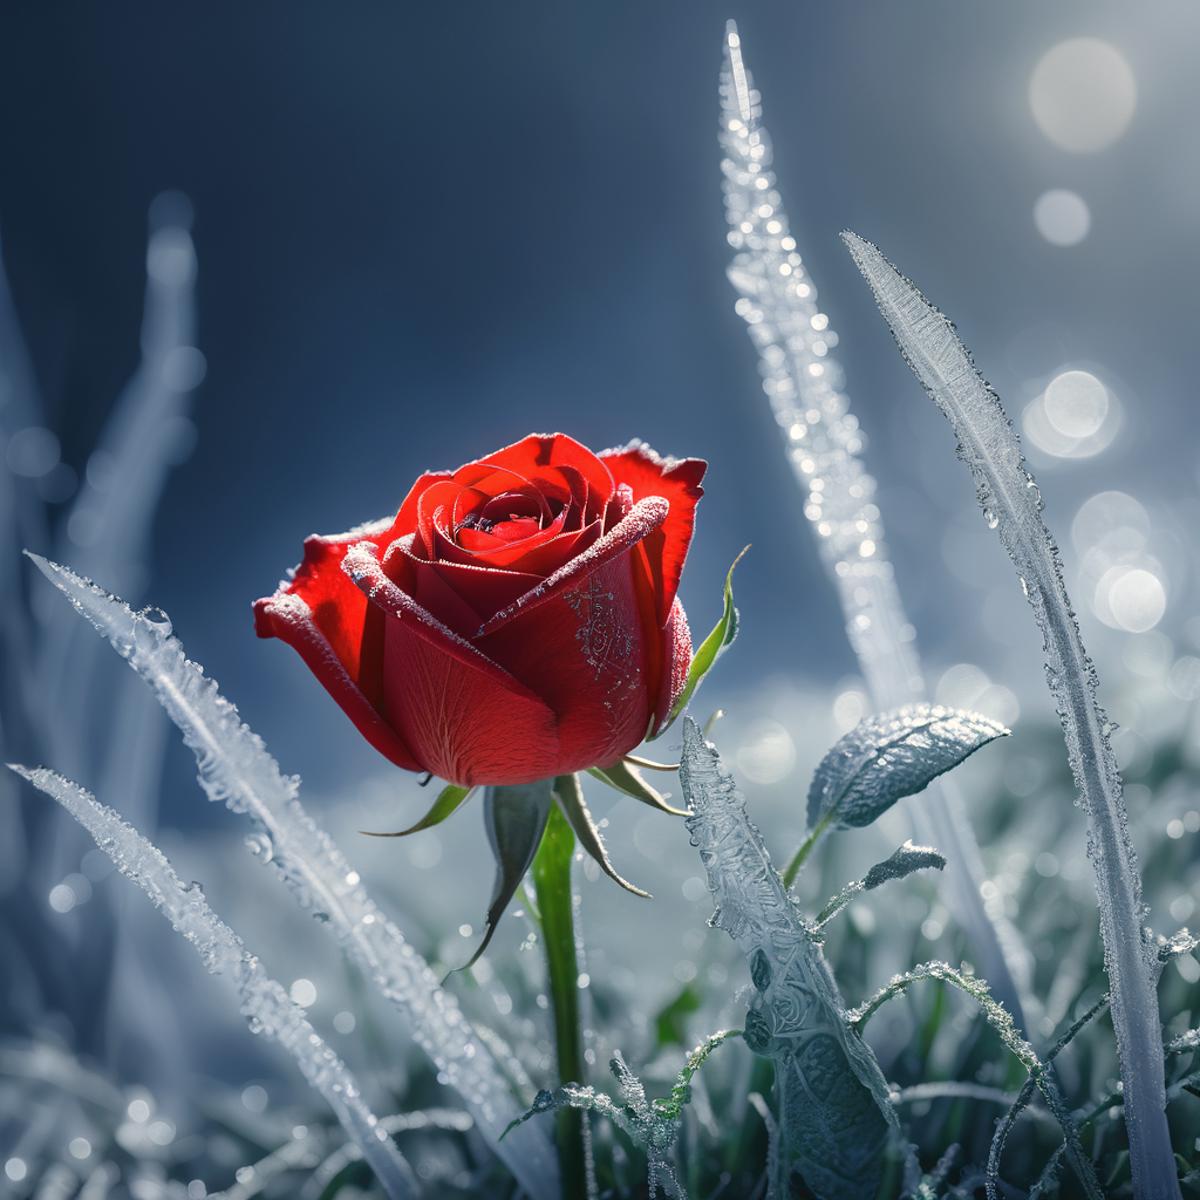 A beautiful rose in the frosty grass.